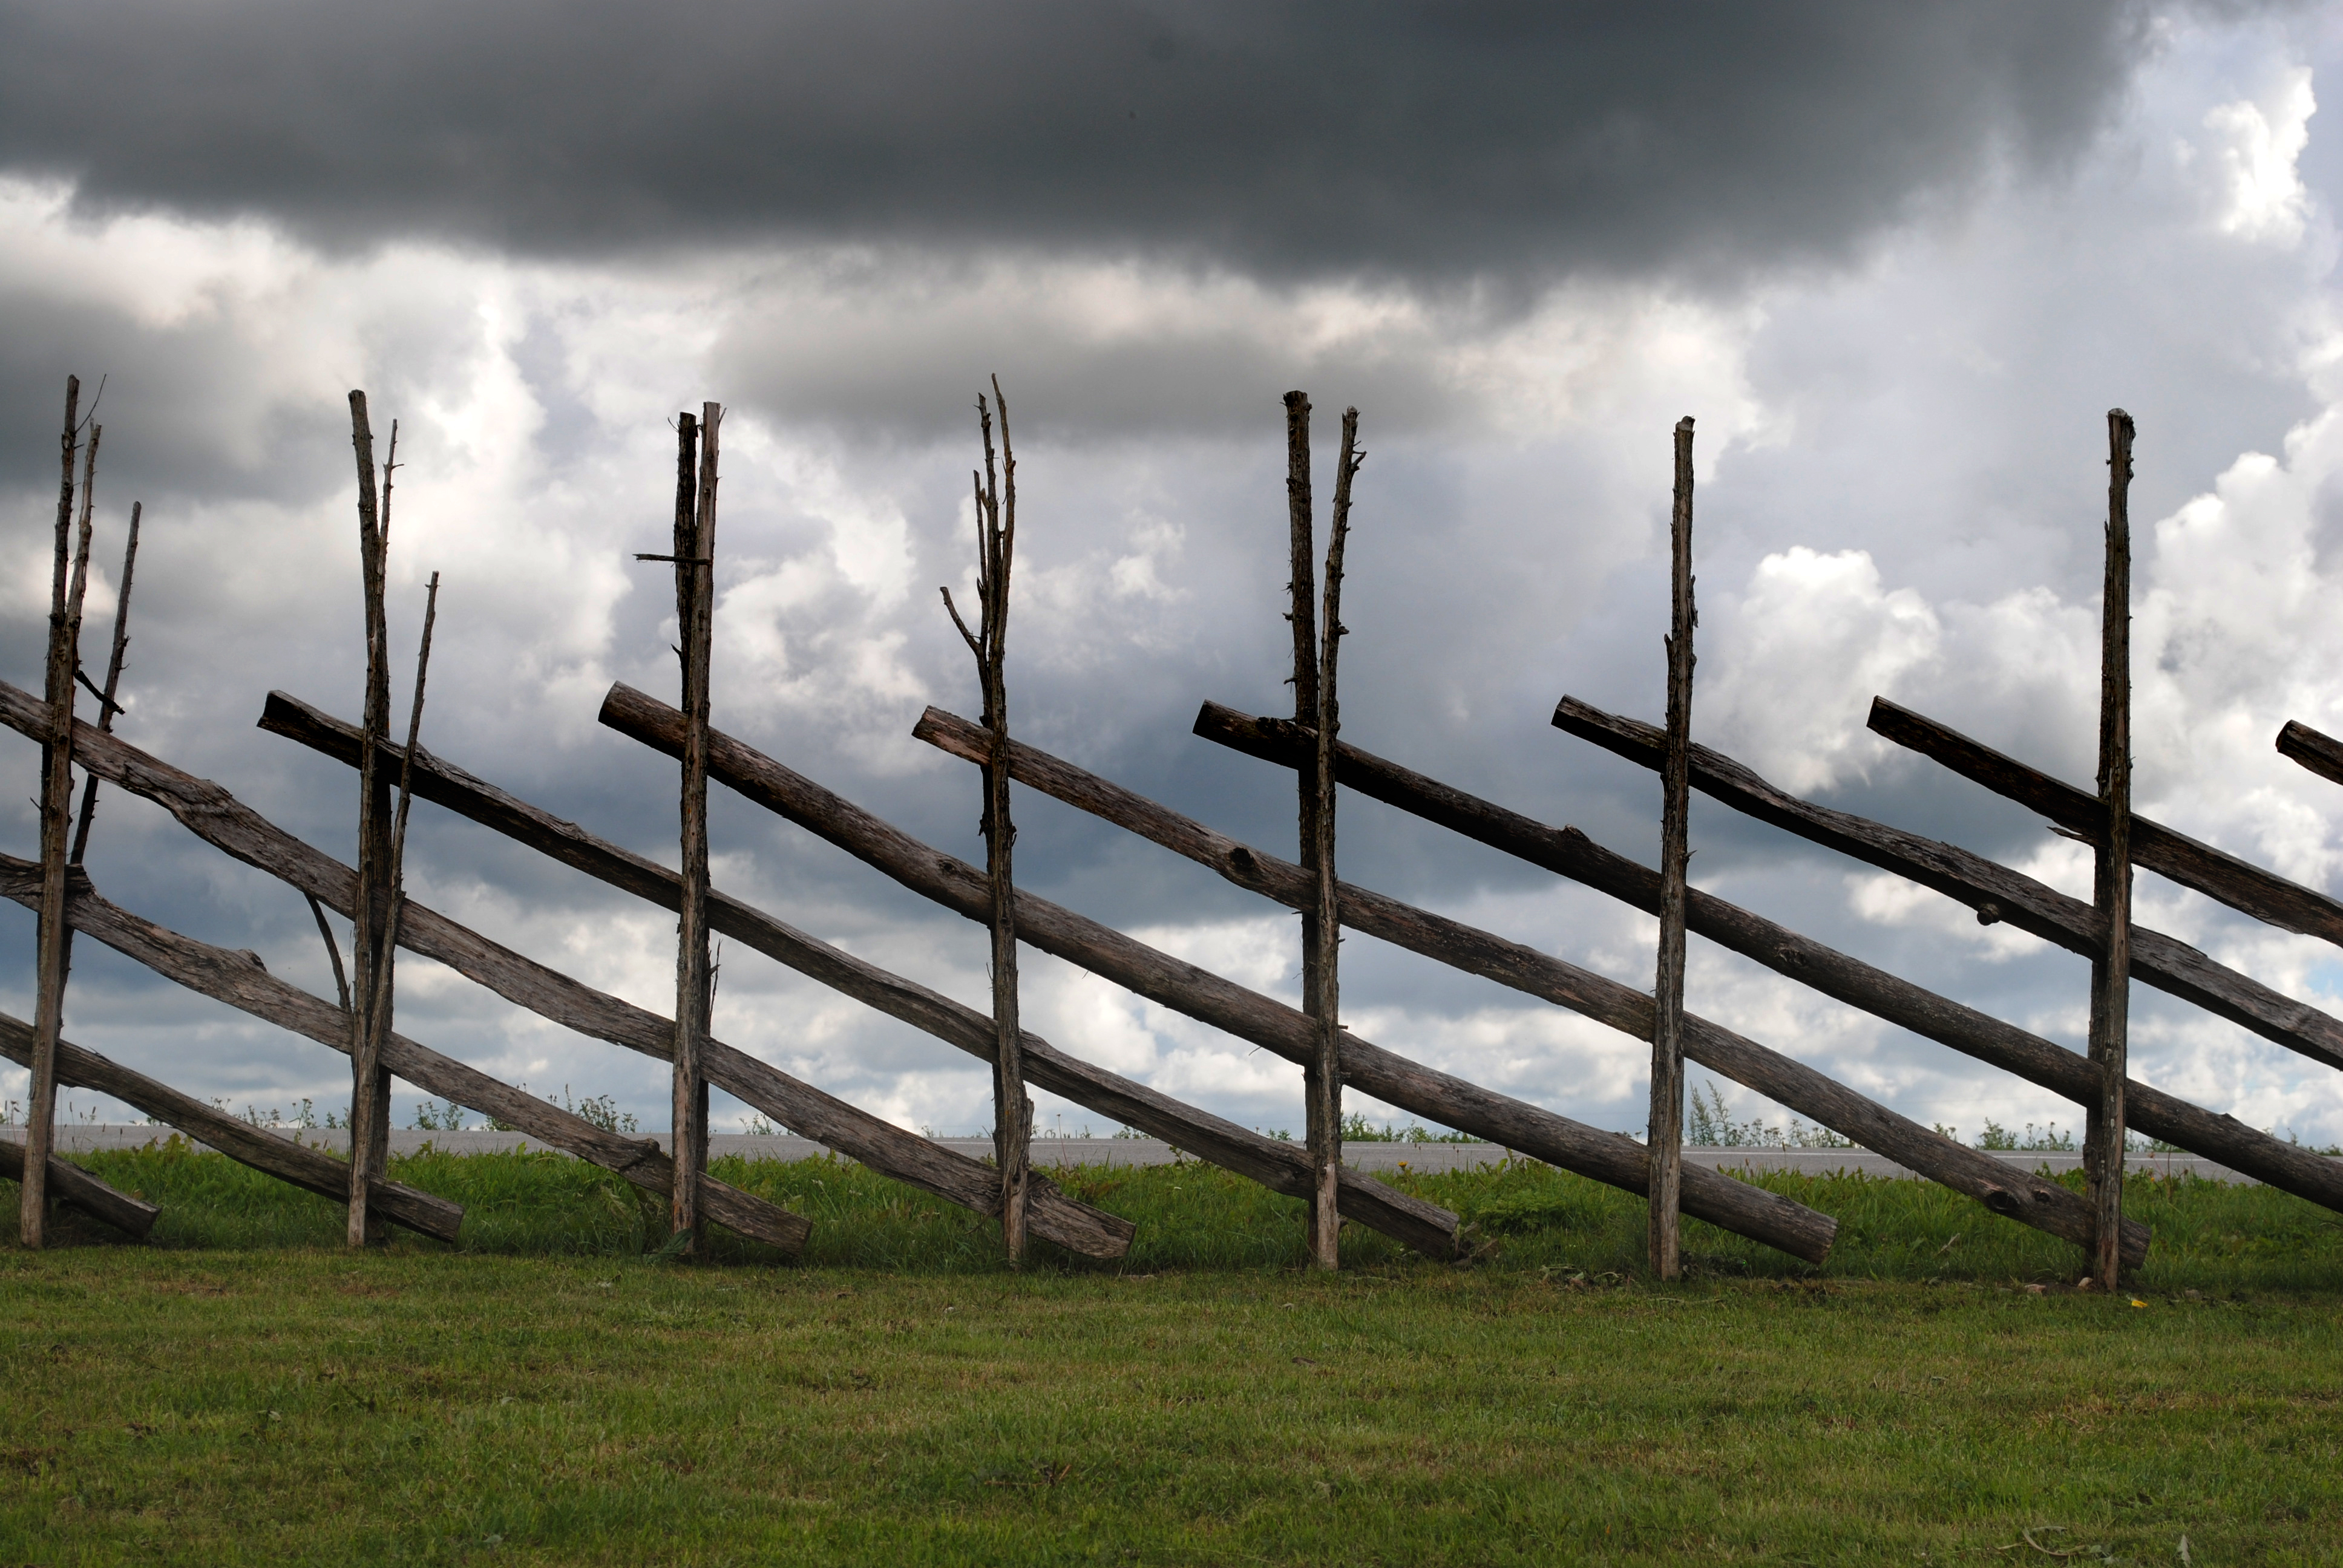 File:Old fence.jpg - Wikimedia Commons